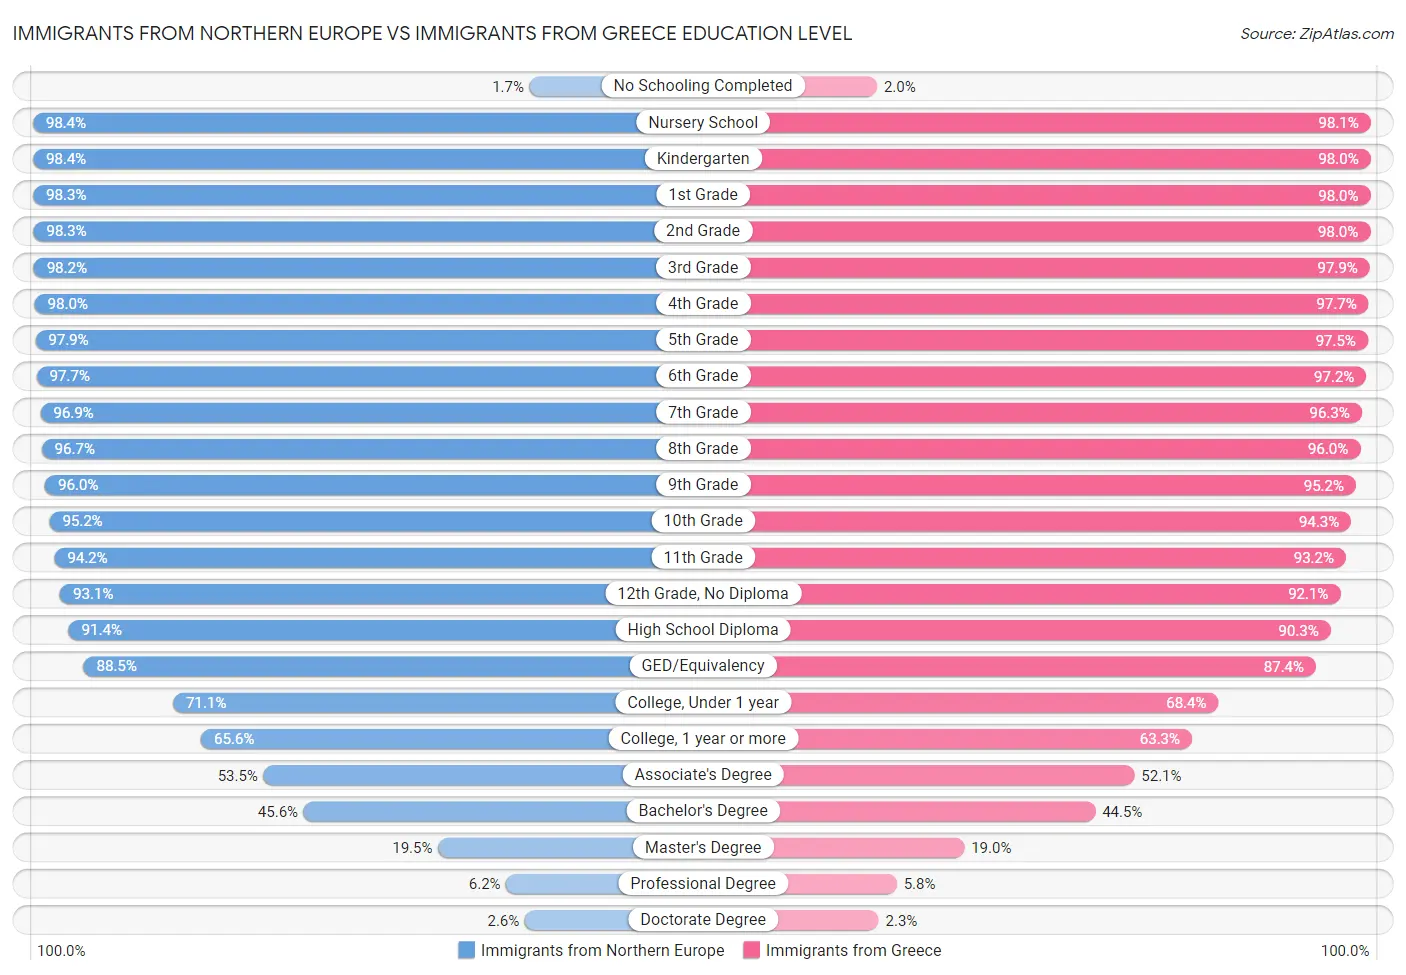 Immigrants from Northern Europe vs Immigrants from Greece Education Level